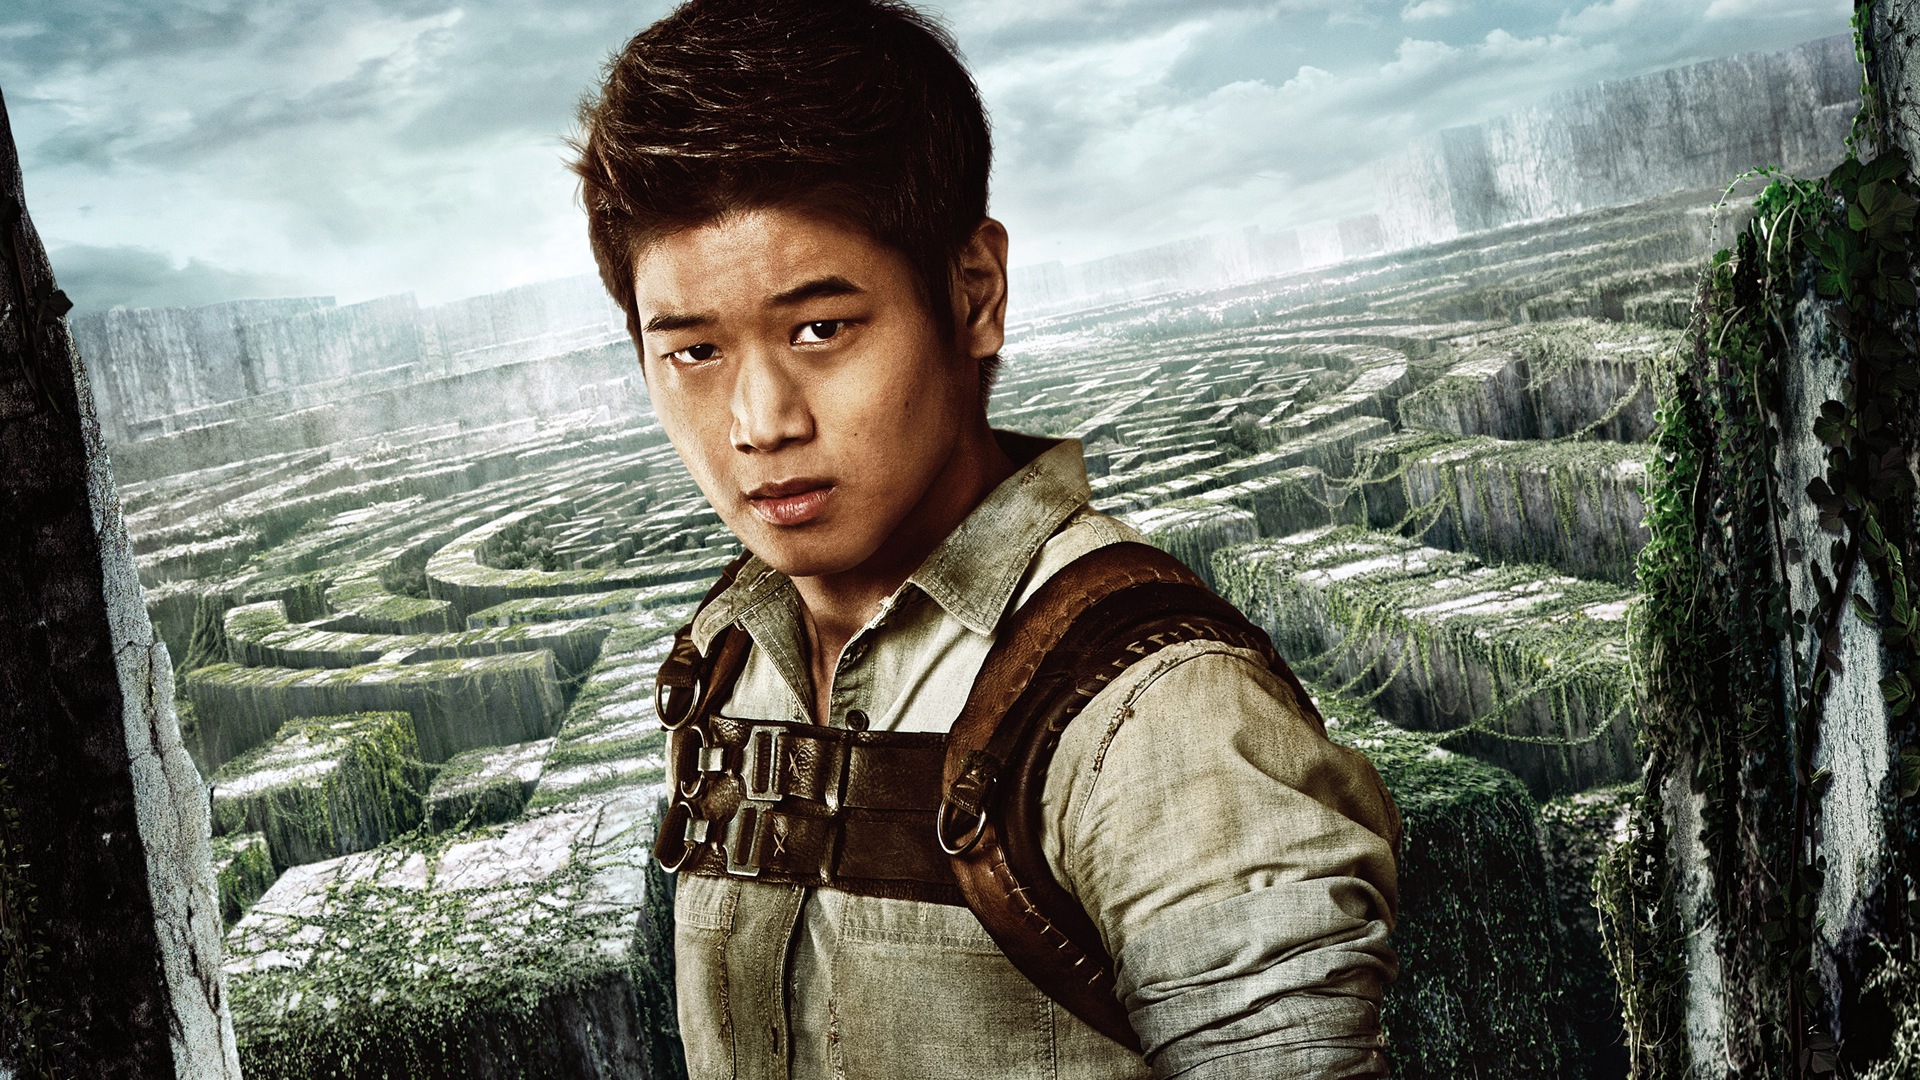 The Maze Runner HD movie wallpapers #10 - 1920x1080